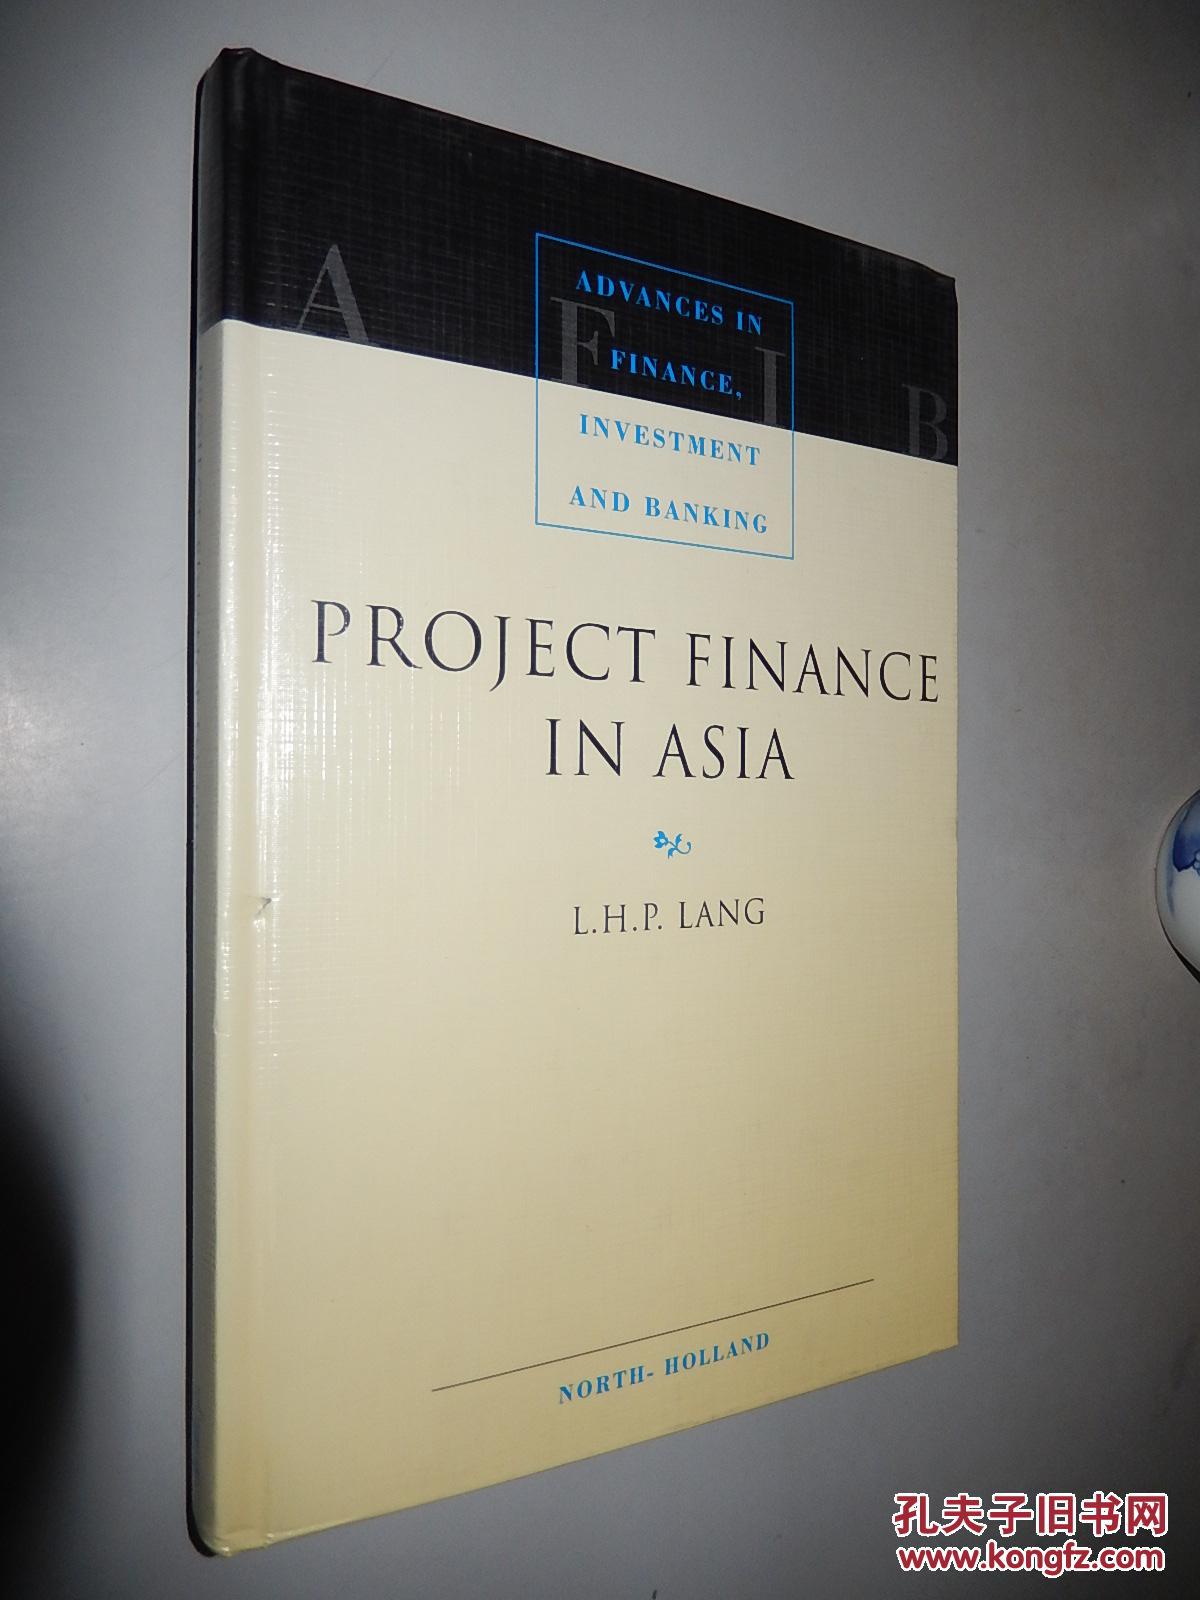 Project Finance in Asia （Advances in Finance, Investment and Banking） 英文原版精装 馆藏书